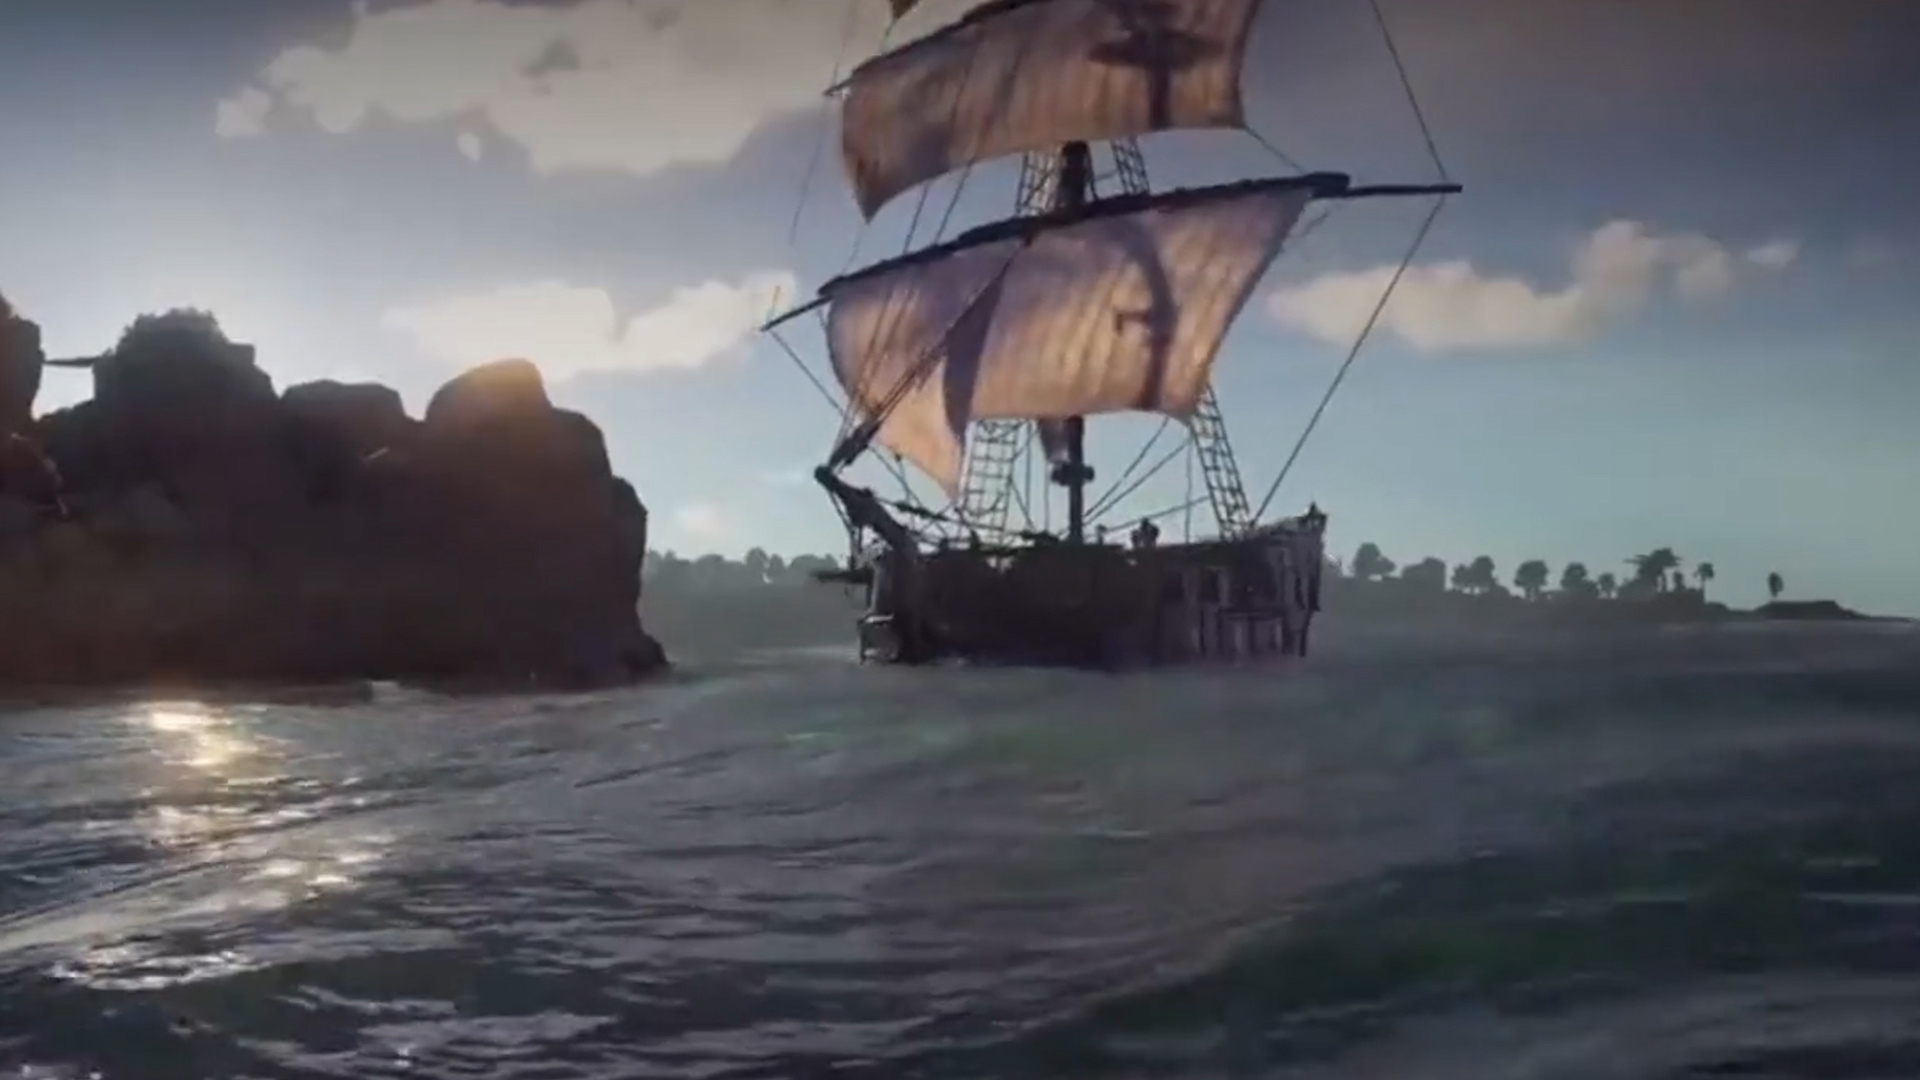 Ubisoft pirate adventure Skull and Bones delayed again, now due early 2024